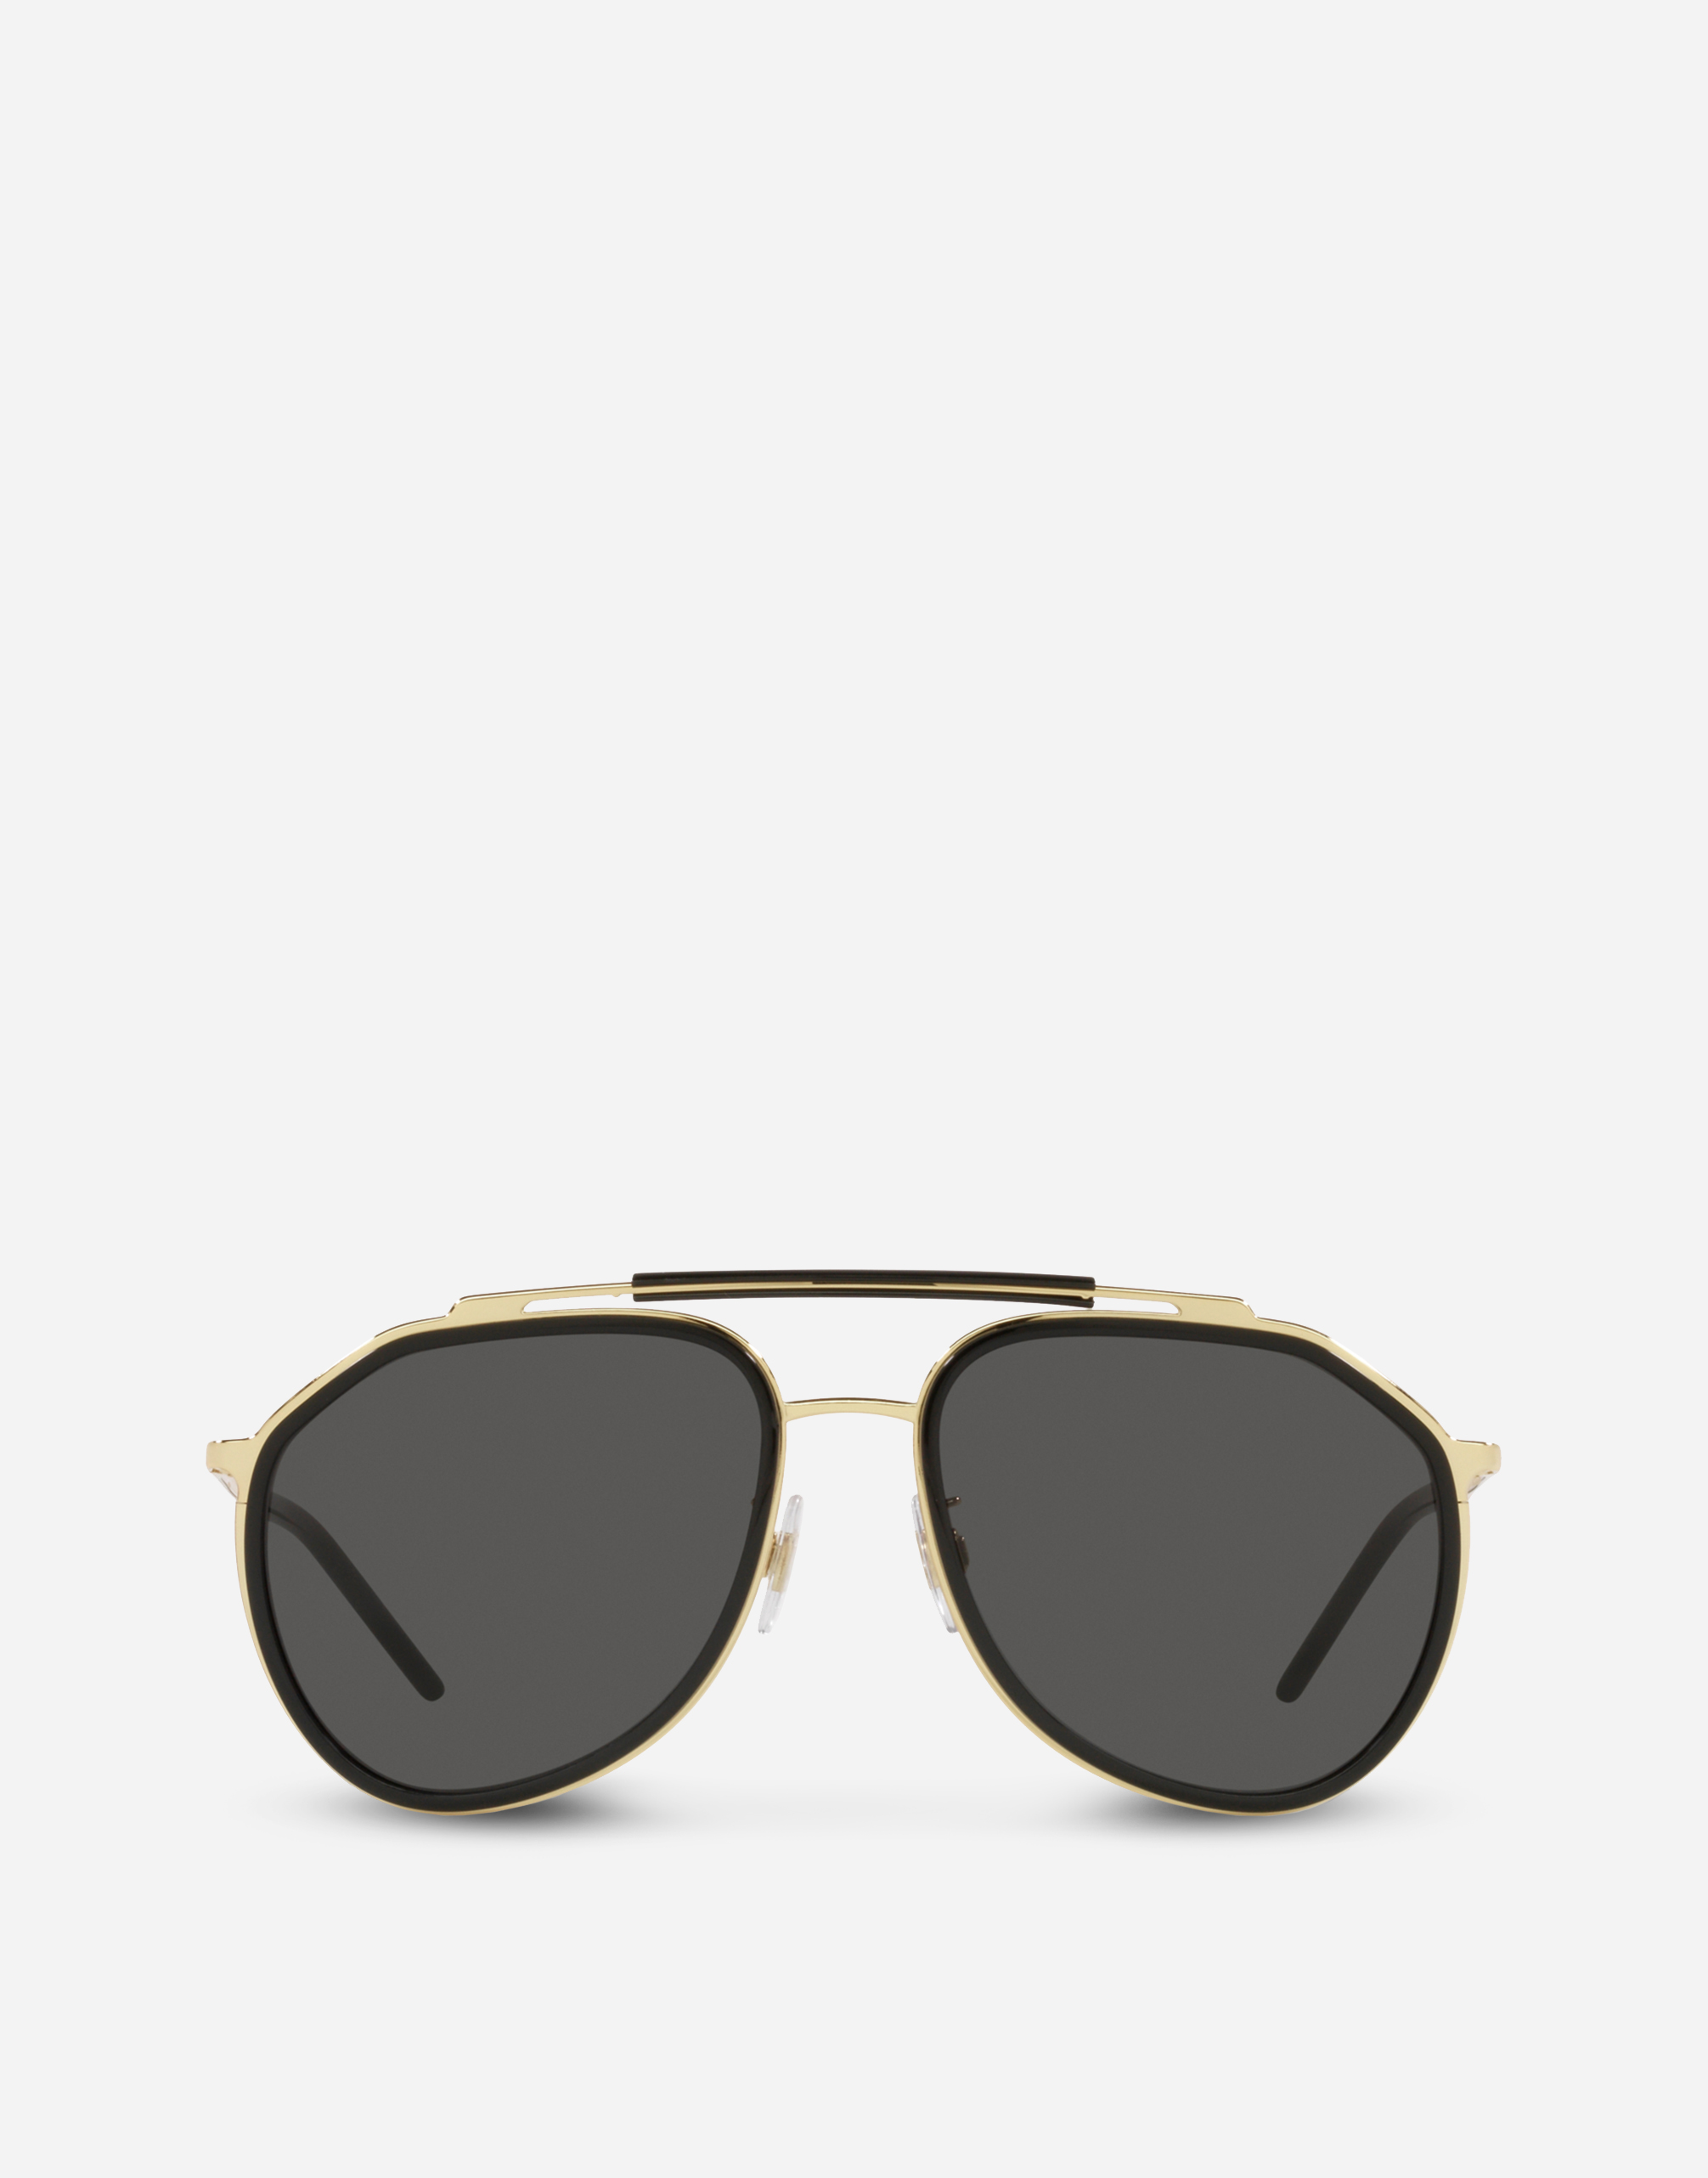 Madison sunglasses in Gold and shiny black